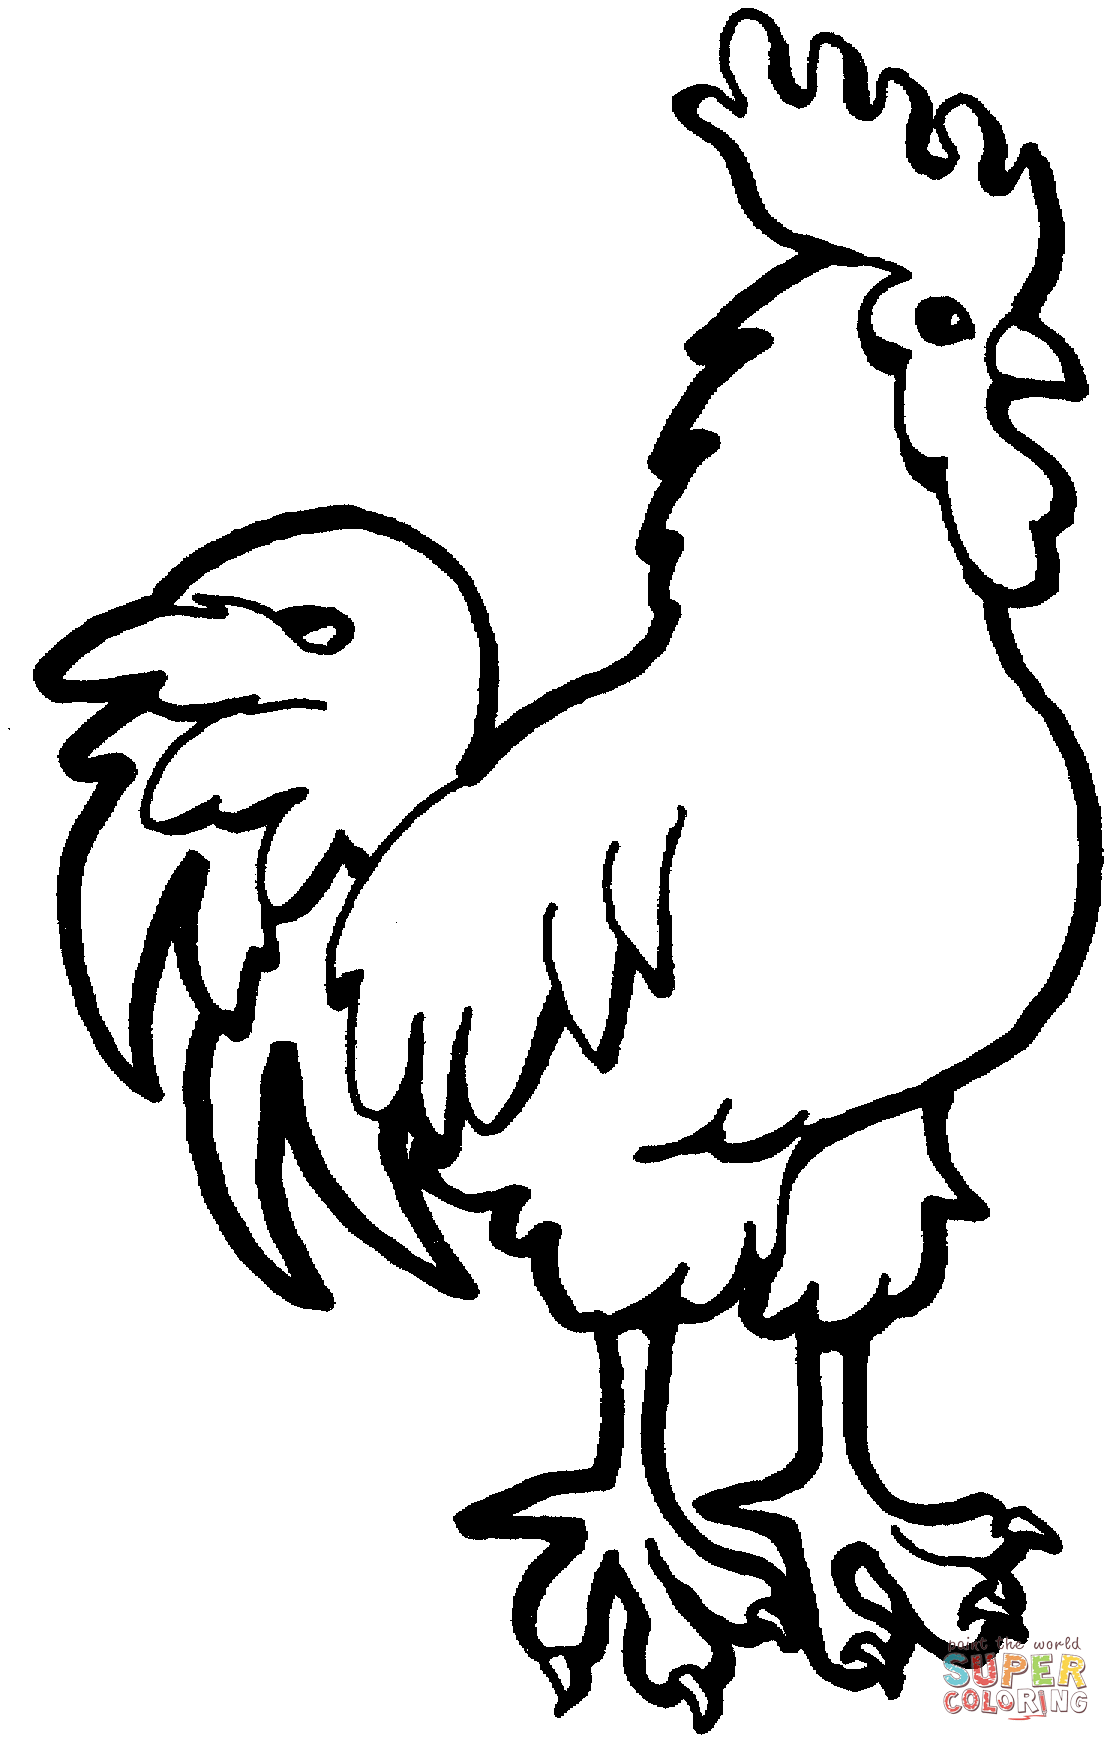 Rooster coloring page | Free Printable Coloring Pages